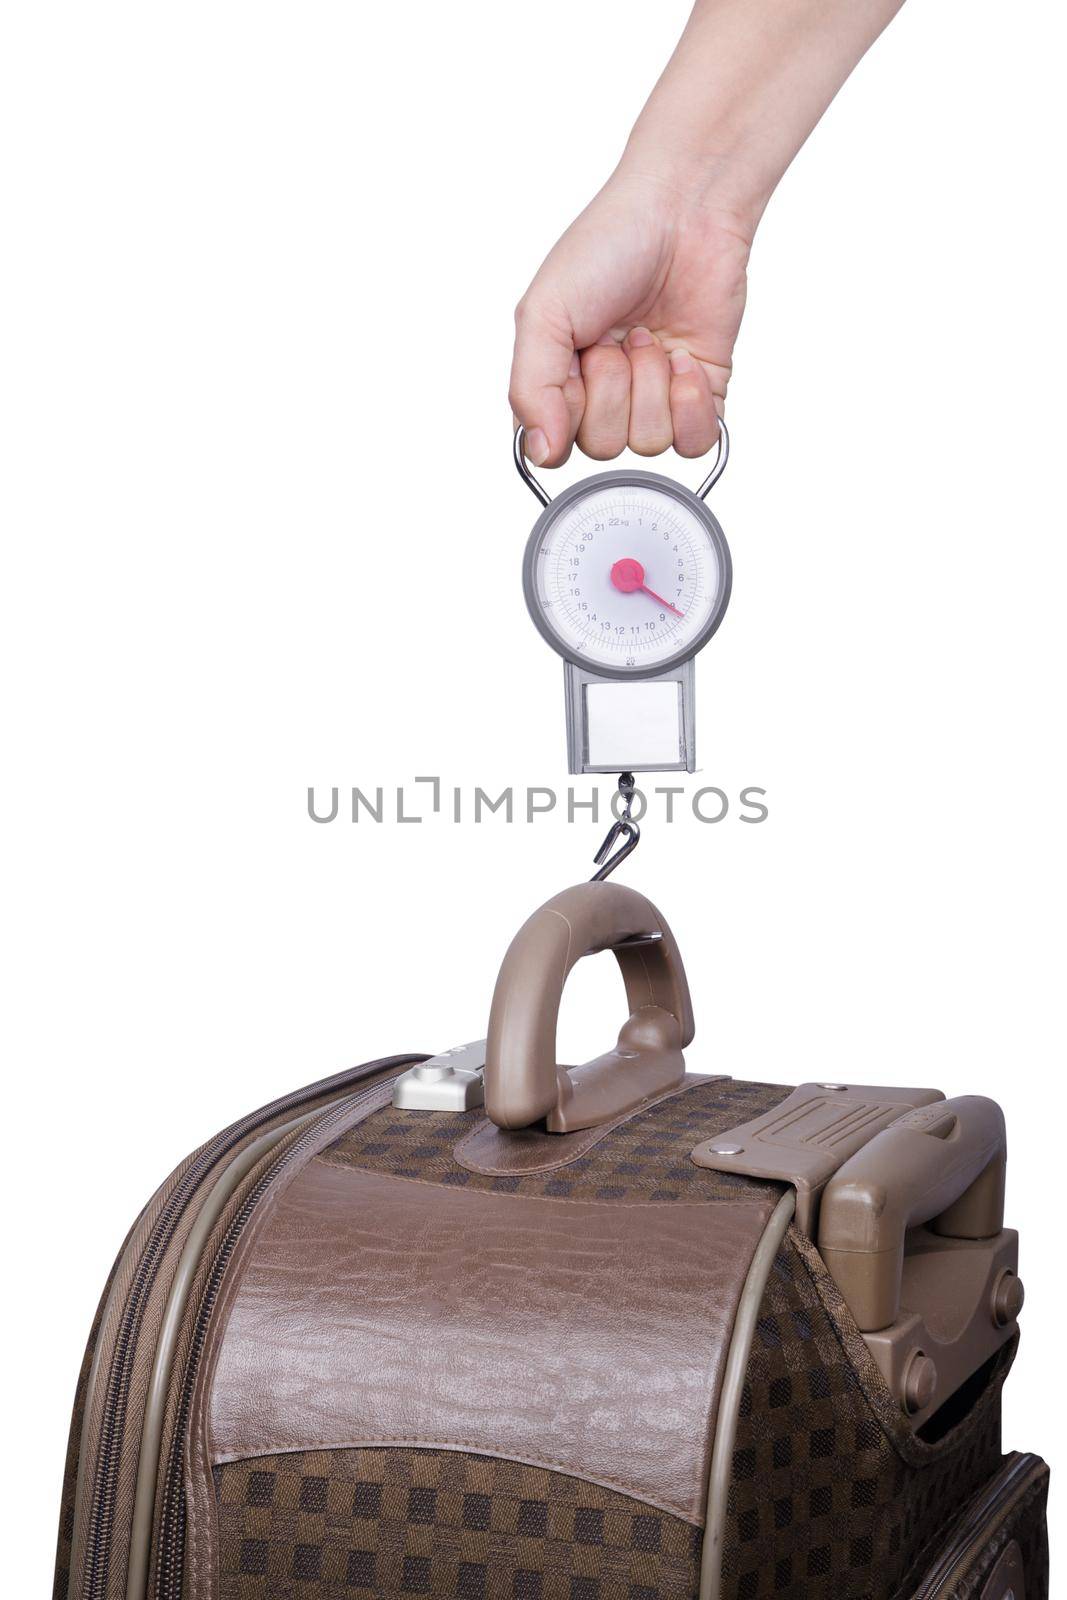 Passenger checking luggage weight with scale before flight isolated on white background